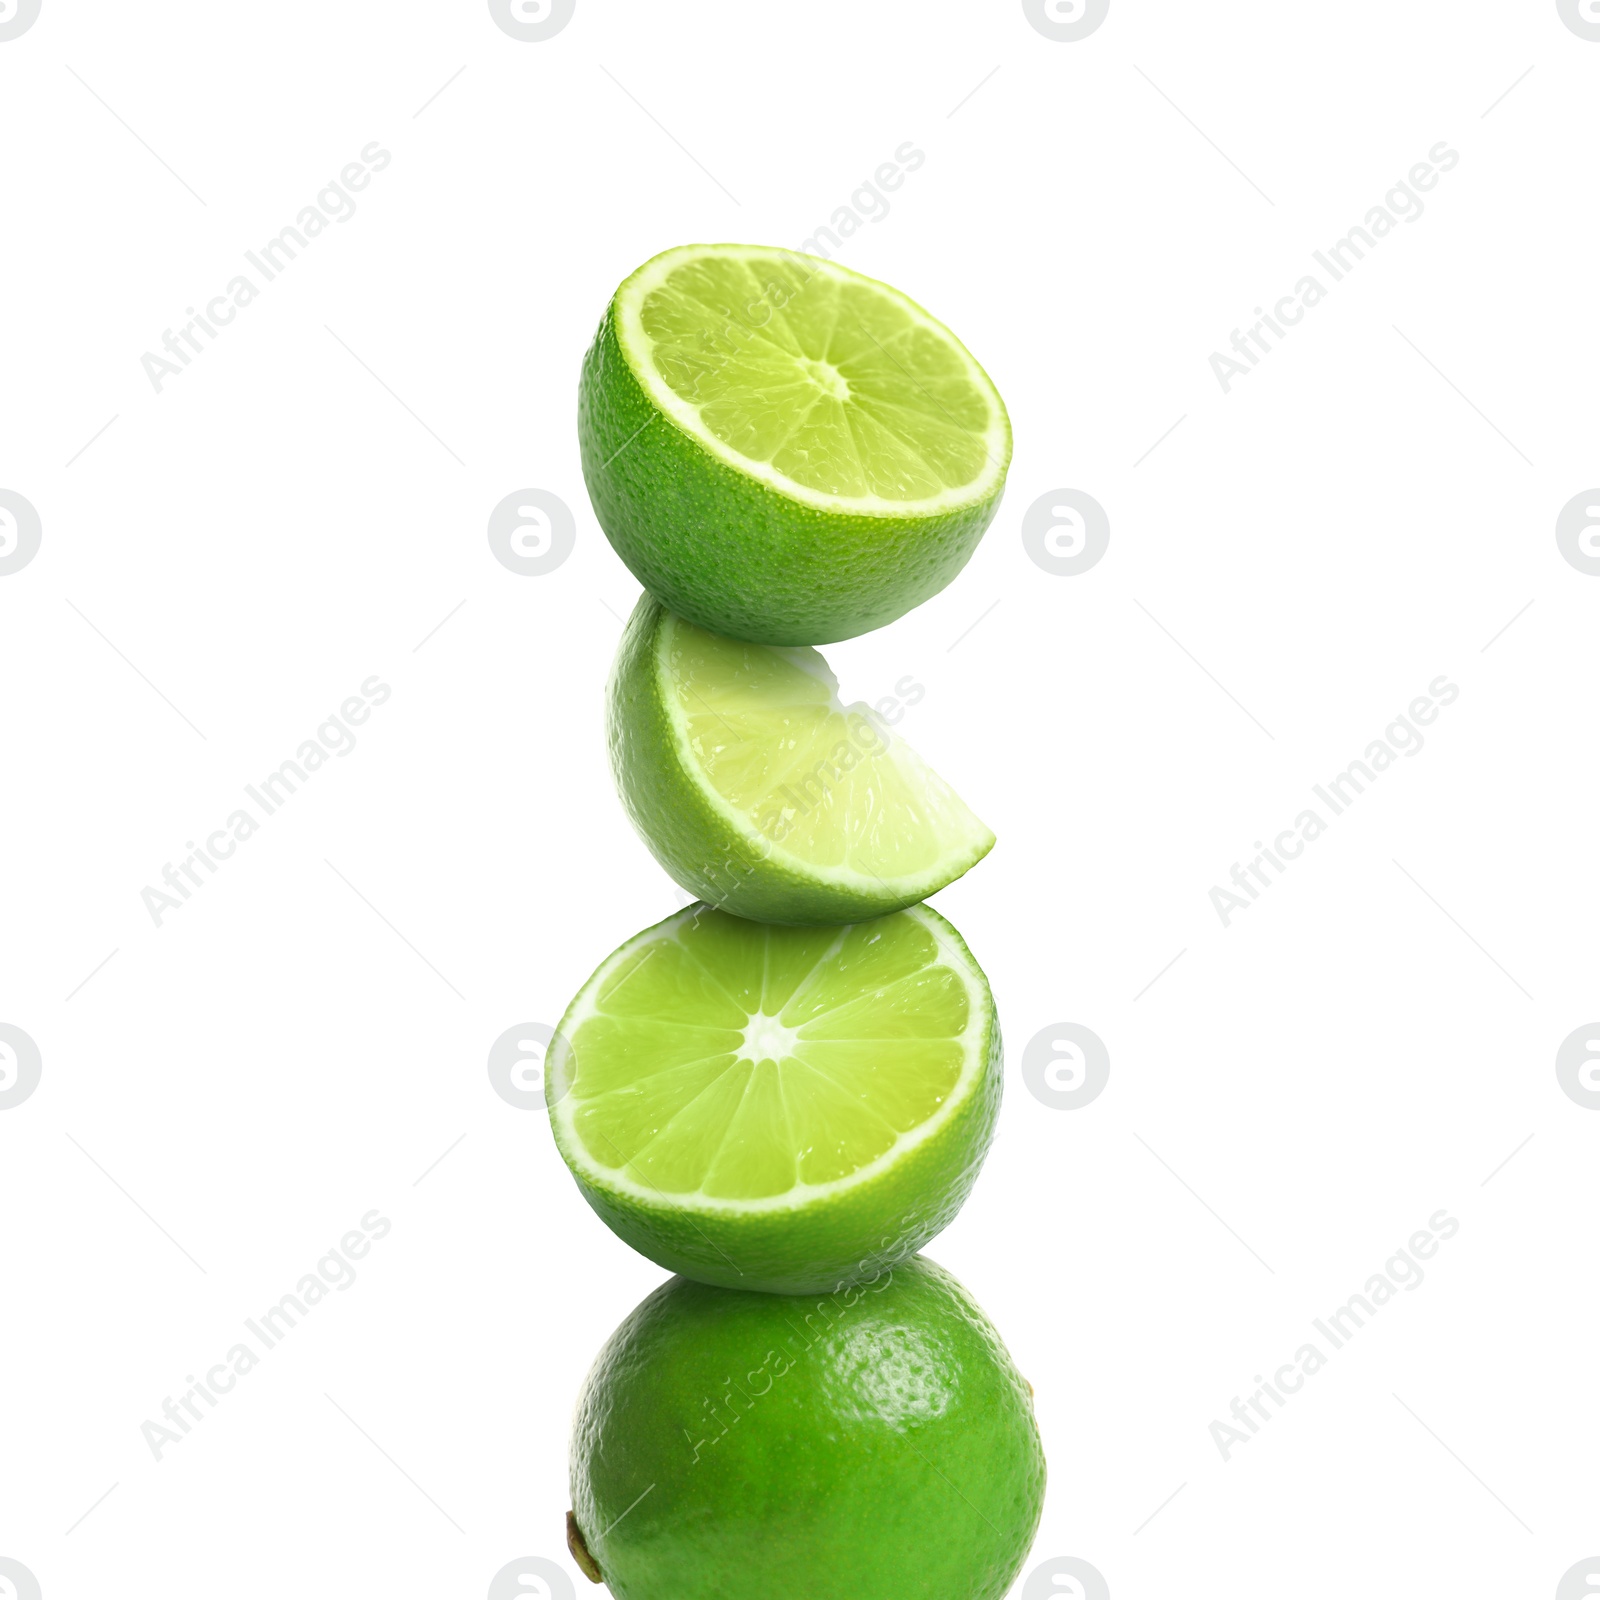 Image of Stacked cut and whole limes on white background